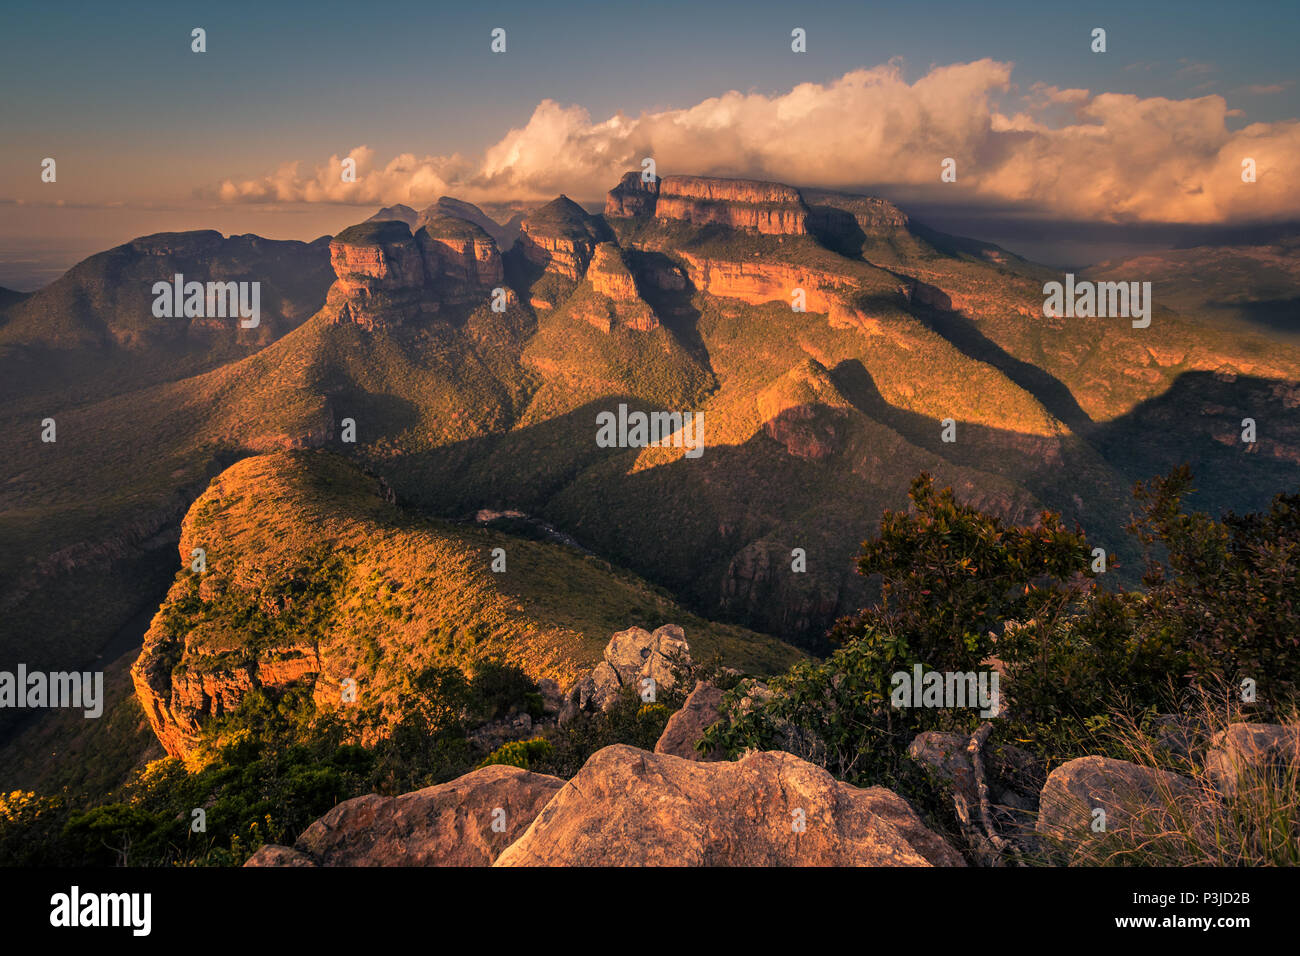 A wide shot of the Three Rondavels and surrounding landscape lit up with dramatic texture and form at sunset golden hour. Mpumalanga, South Africa Stock Photo